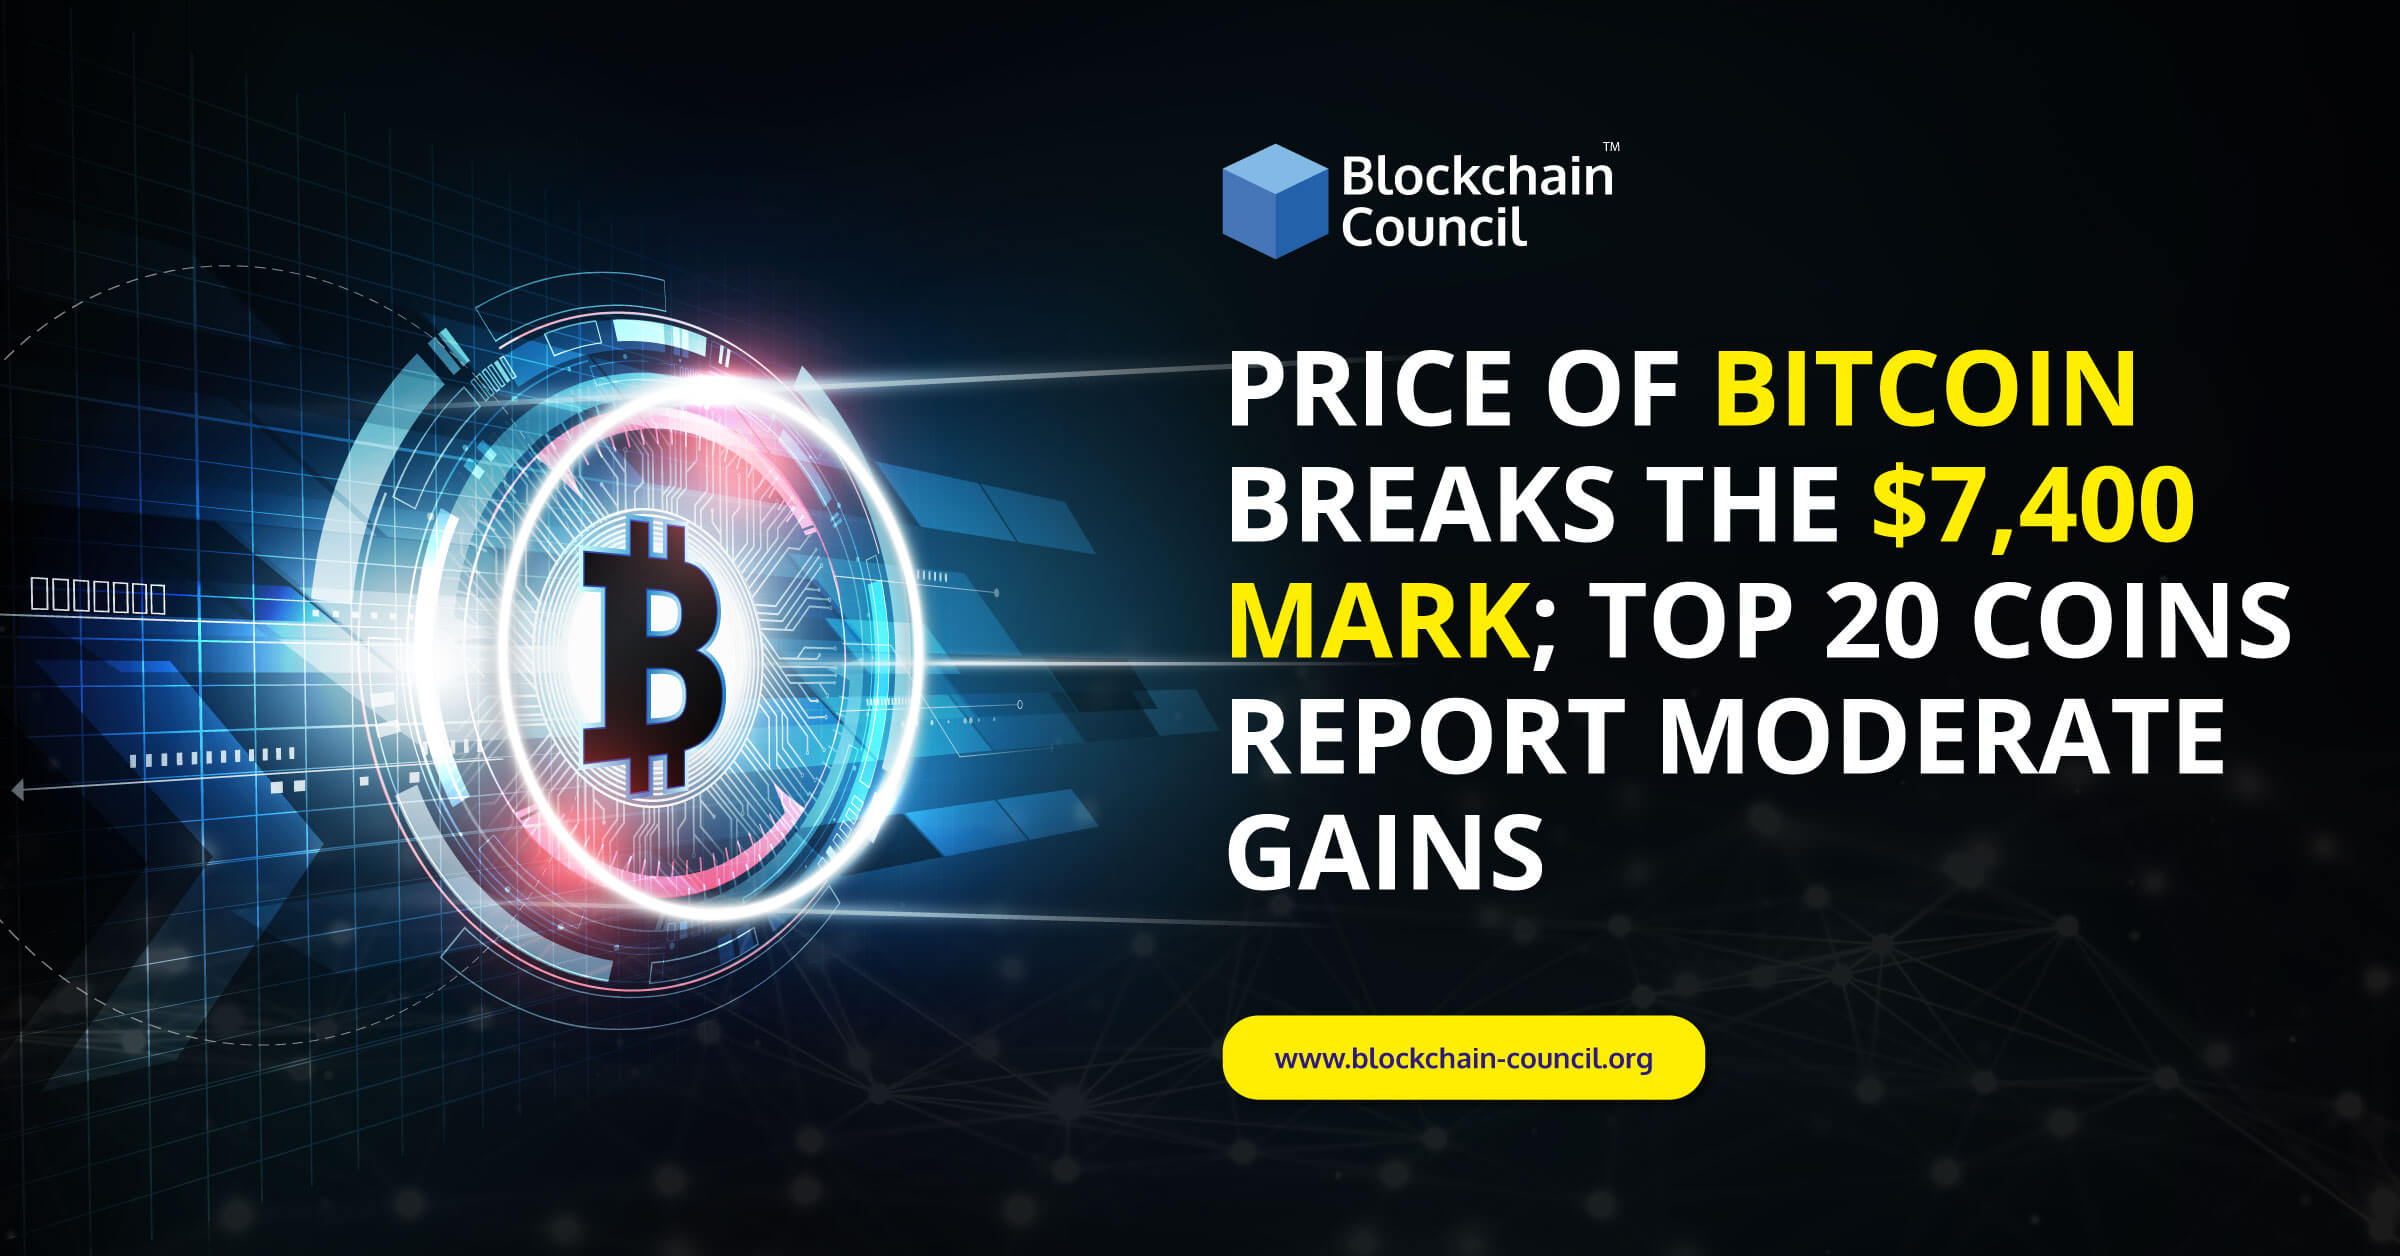 Price-of-Bitcoin-Breaks-the-$7,400-Mark_-Top-20-Coins-Report-Moderate-Gains